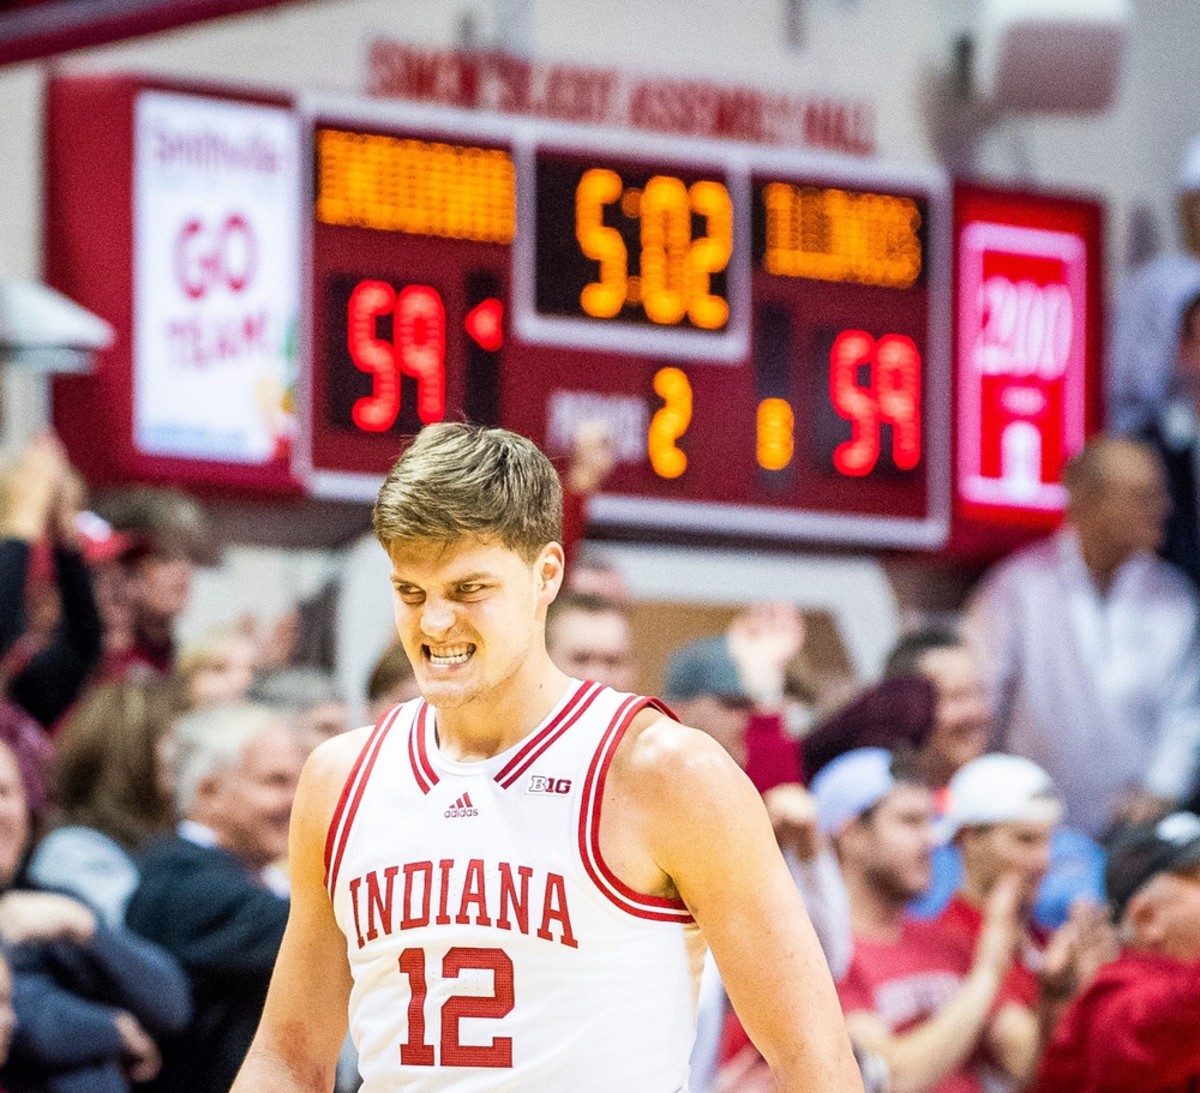 Indiana's Miller Kopp (12) celebrates during the second half of the Indiana versus Illinois men's basketball game.